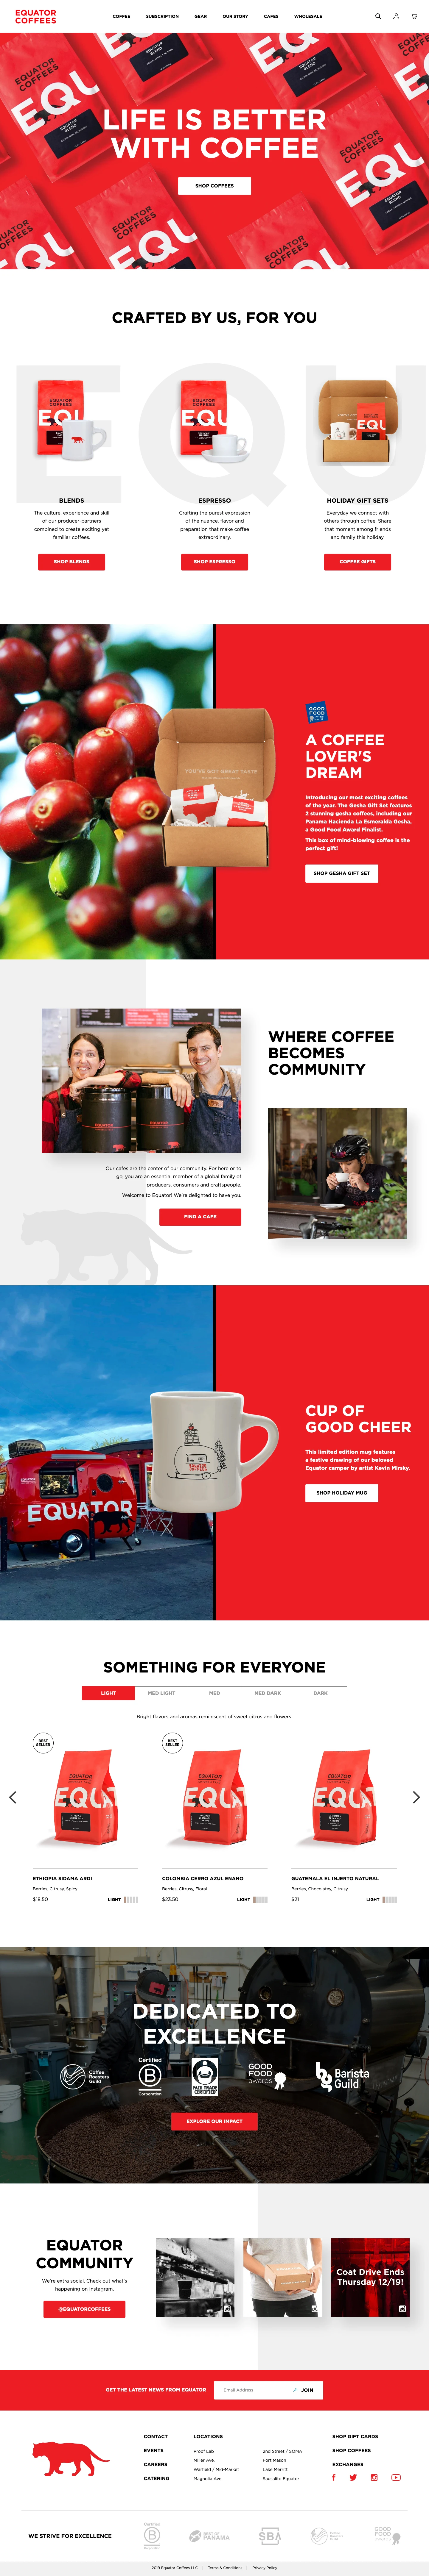 Equator Coffees Landing Page Example: Equator Coffees is a coffee roaster, tea purveyor, retail operator, and coffee farm owner. Founded in 1995, Equator is known for its commitment to a sustainable, transparent business and for selling fine coffees and teas.